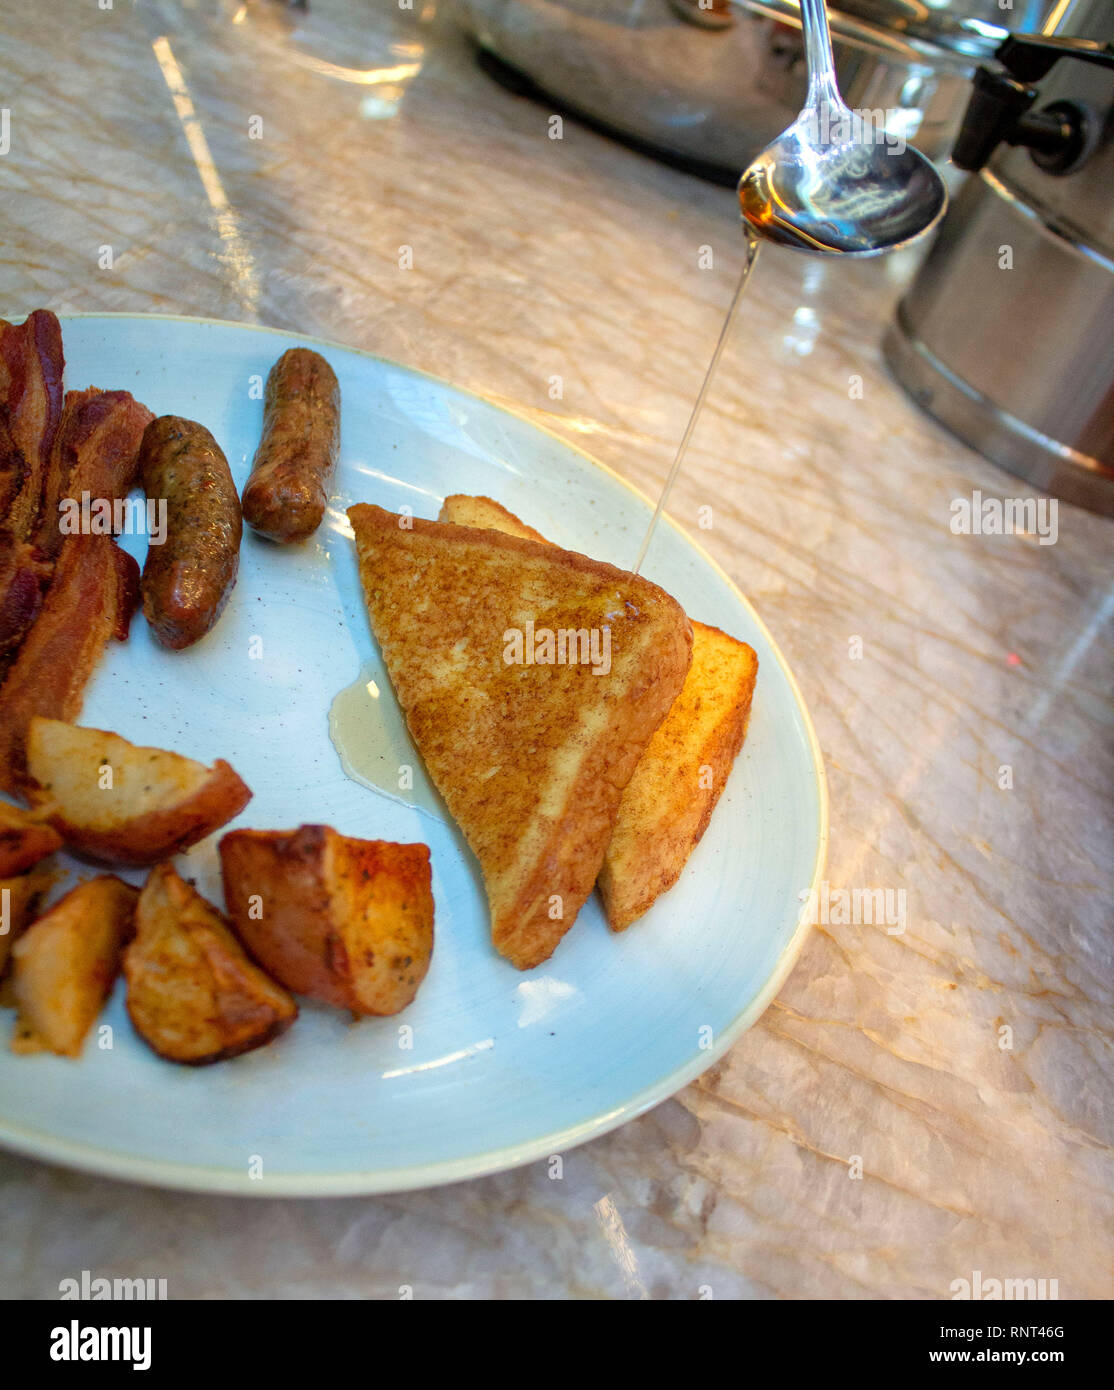 Syrup being poured on french toast on a plate with bacon, sausage links, and potatoes. Stock Photo